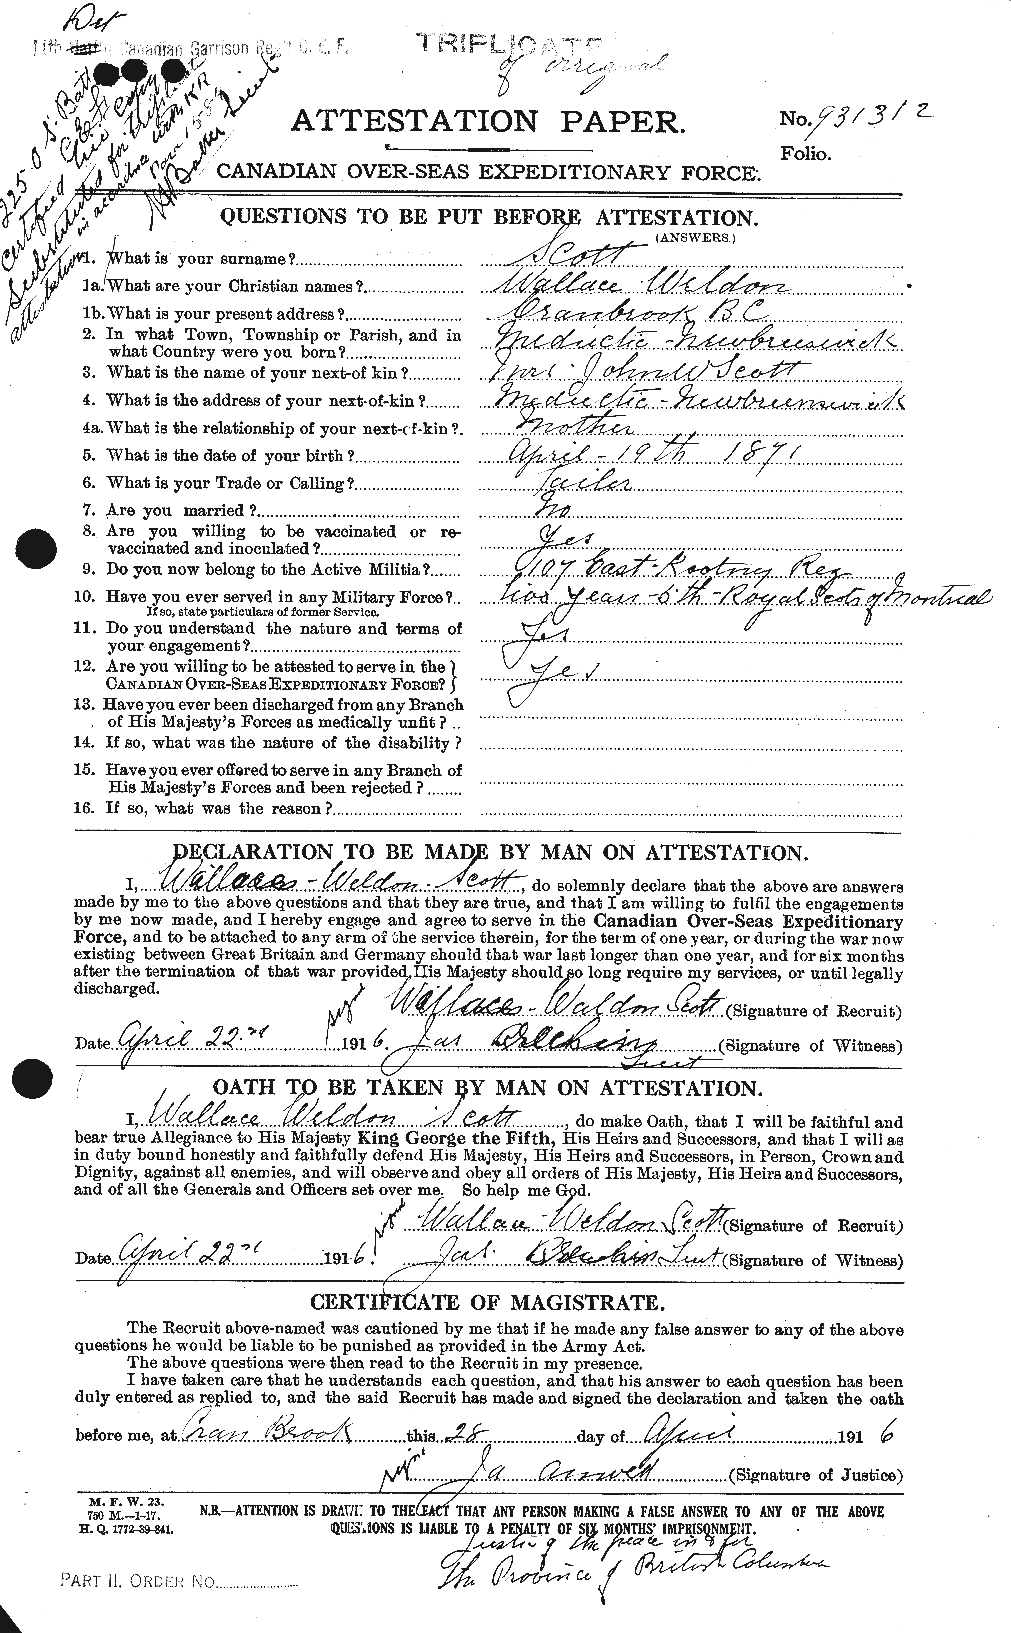 Personnel Records of the First World War - CEF 088192a